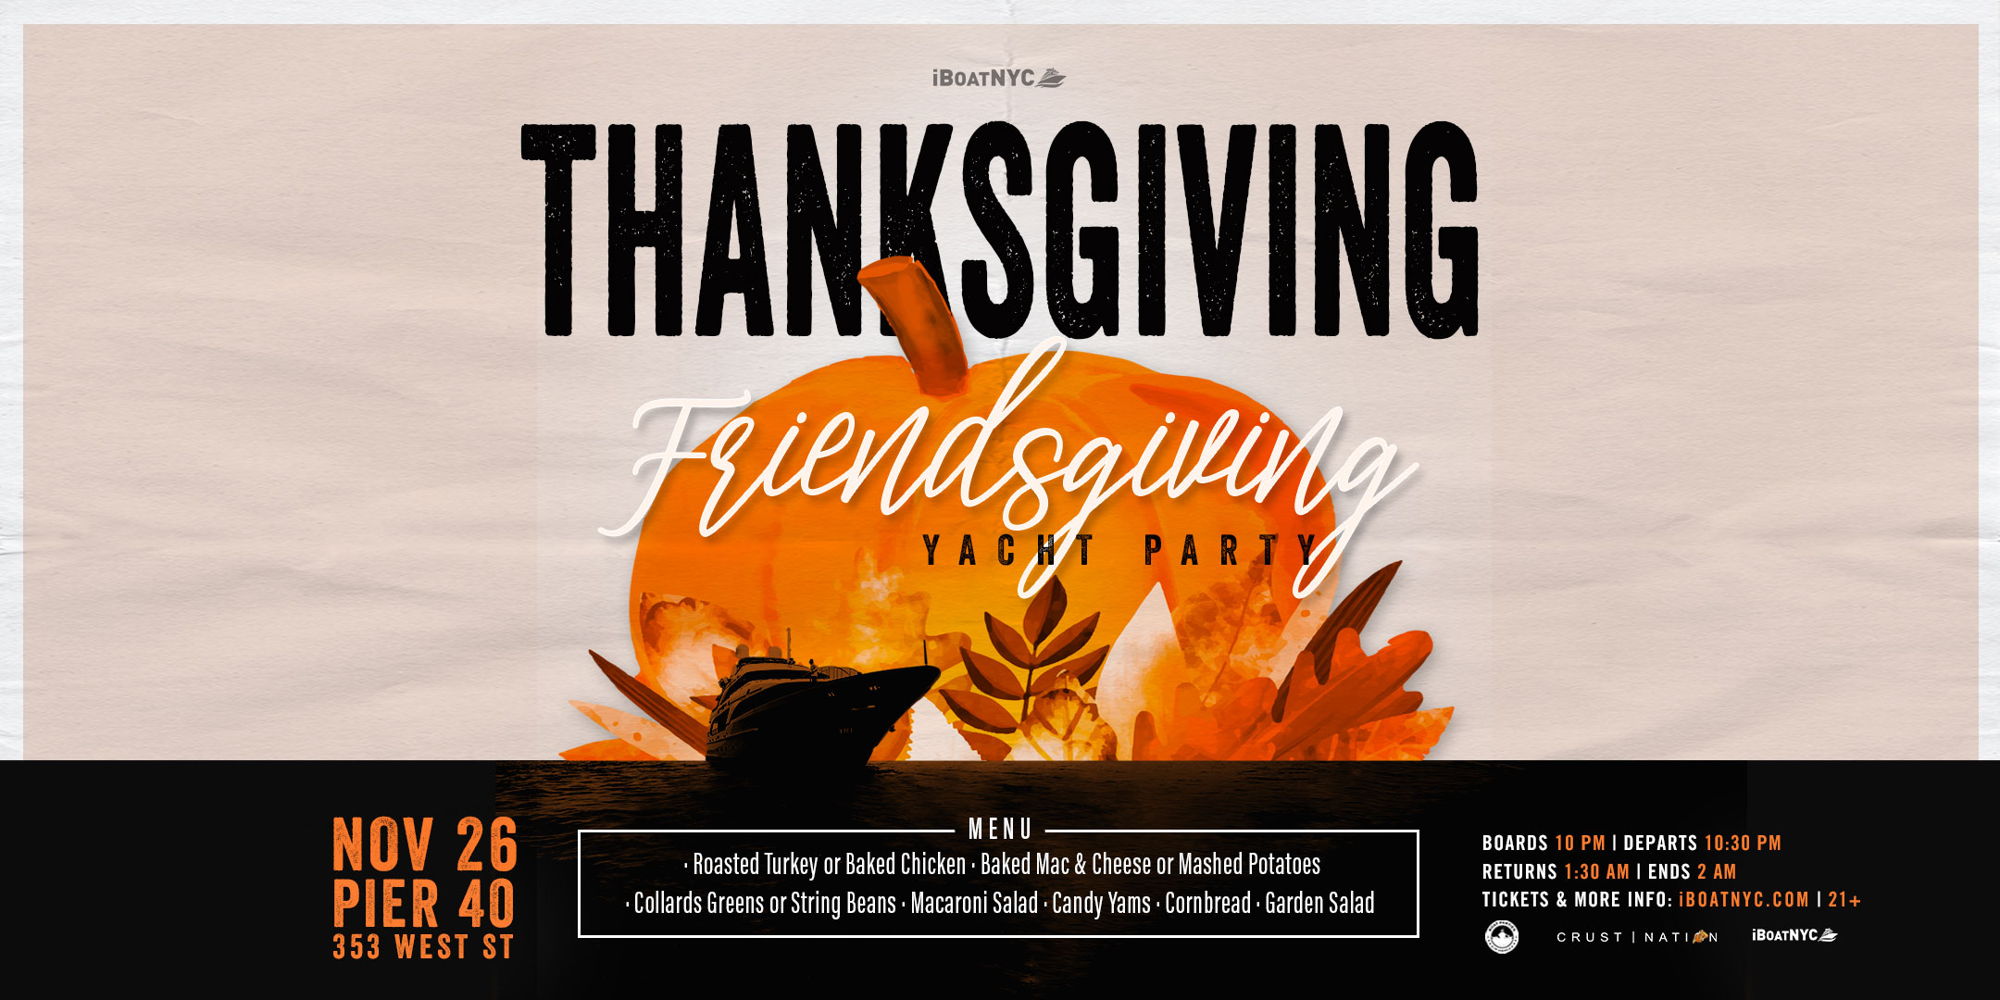 Thanksgiving Friendsgiving Party - Yacht Cruise NYC promotional image